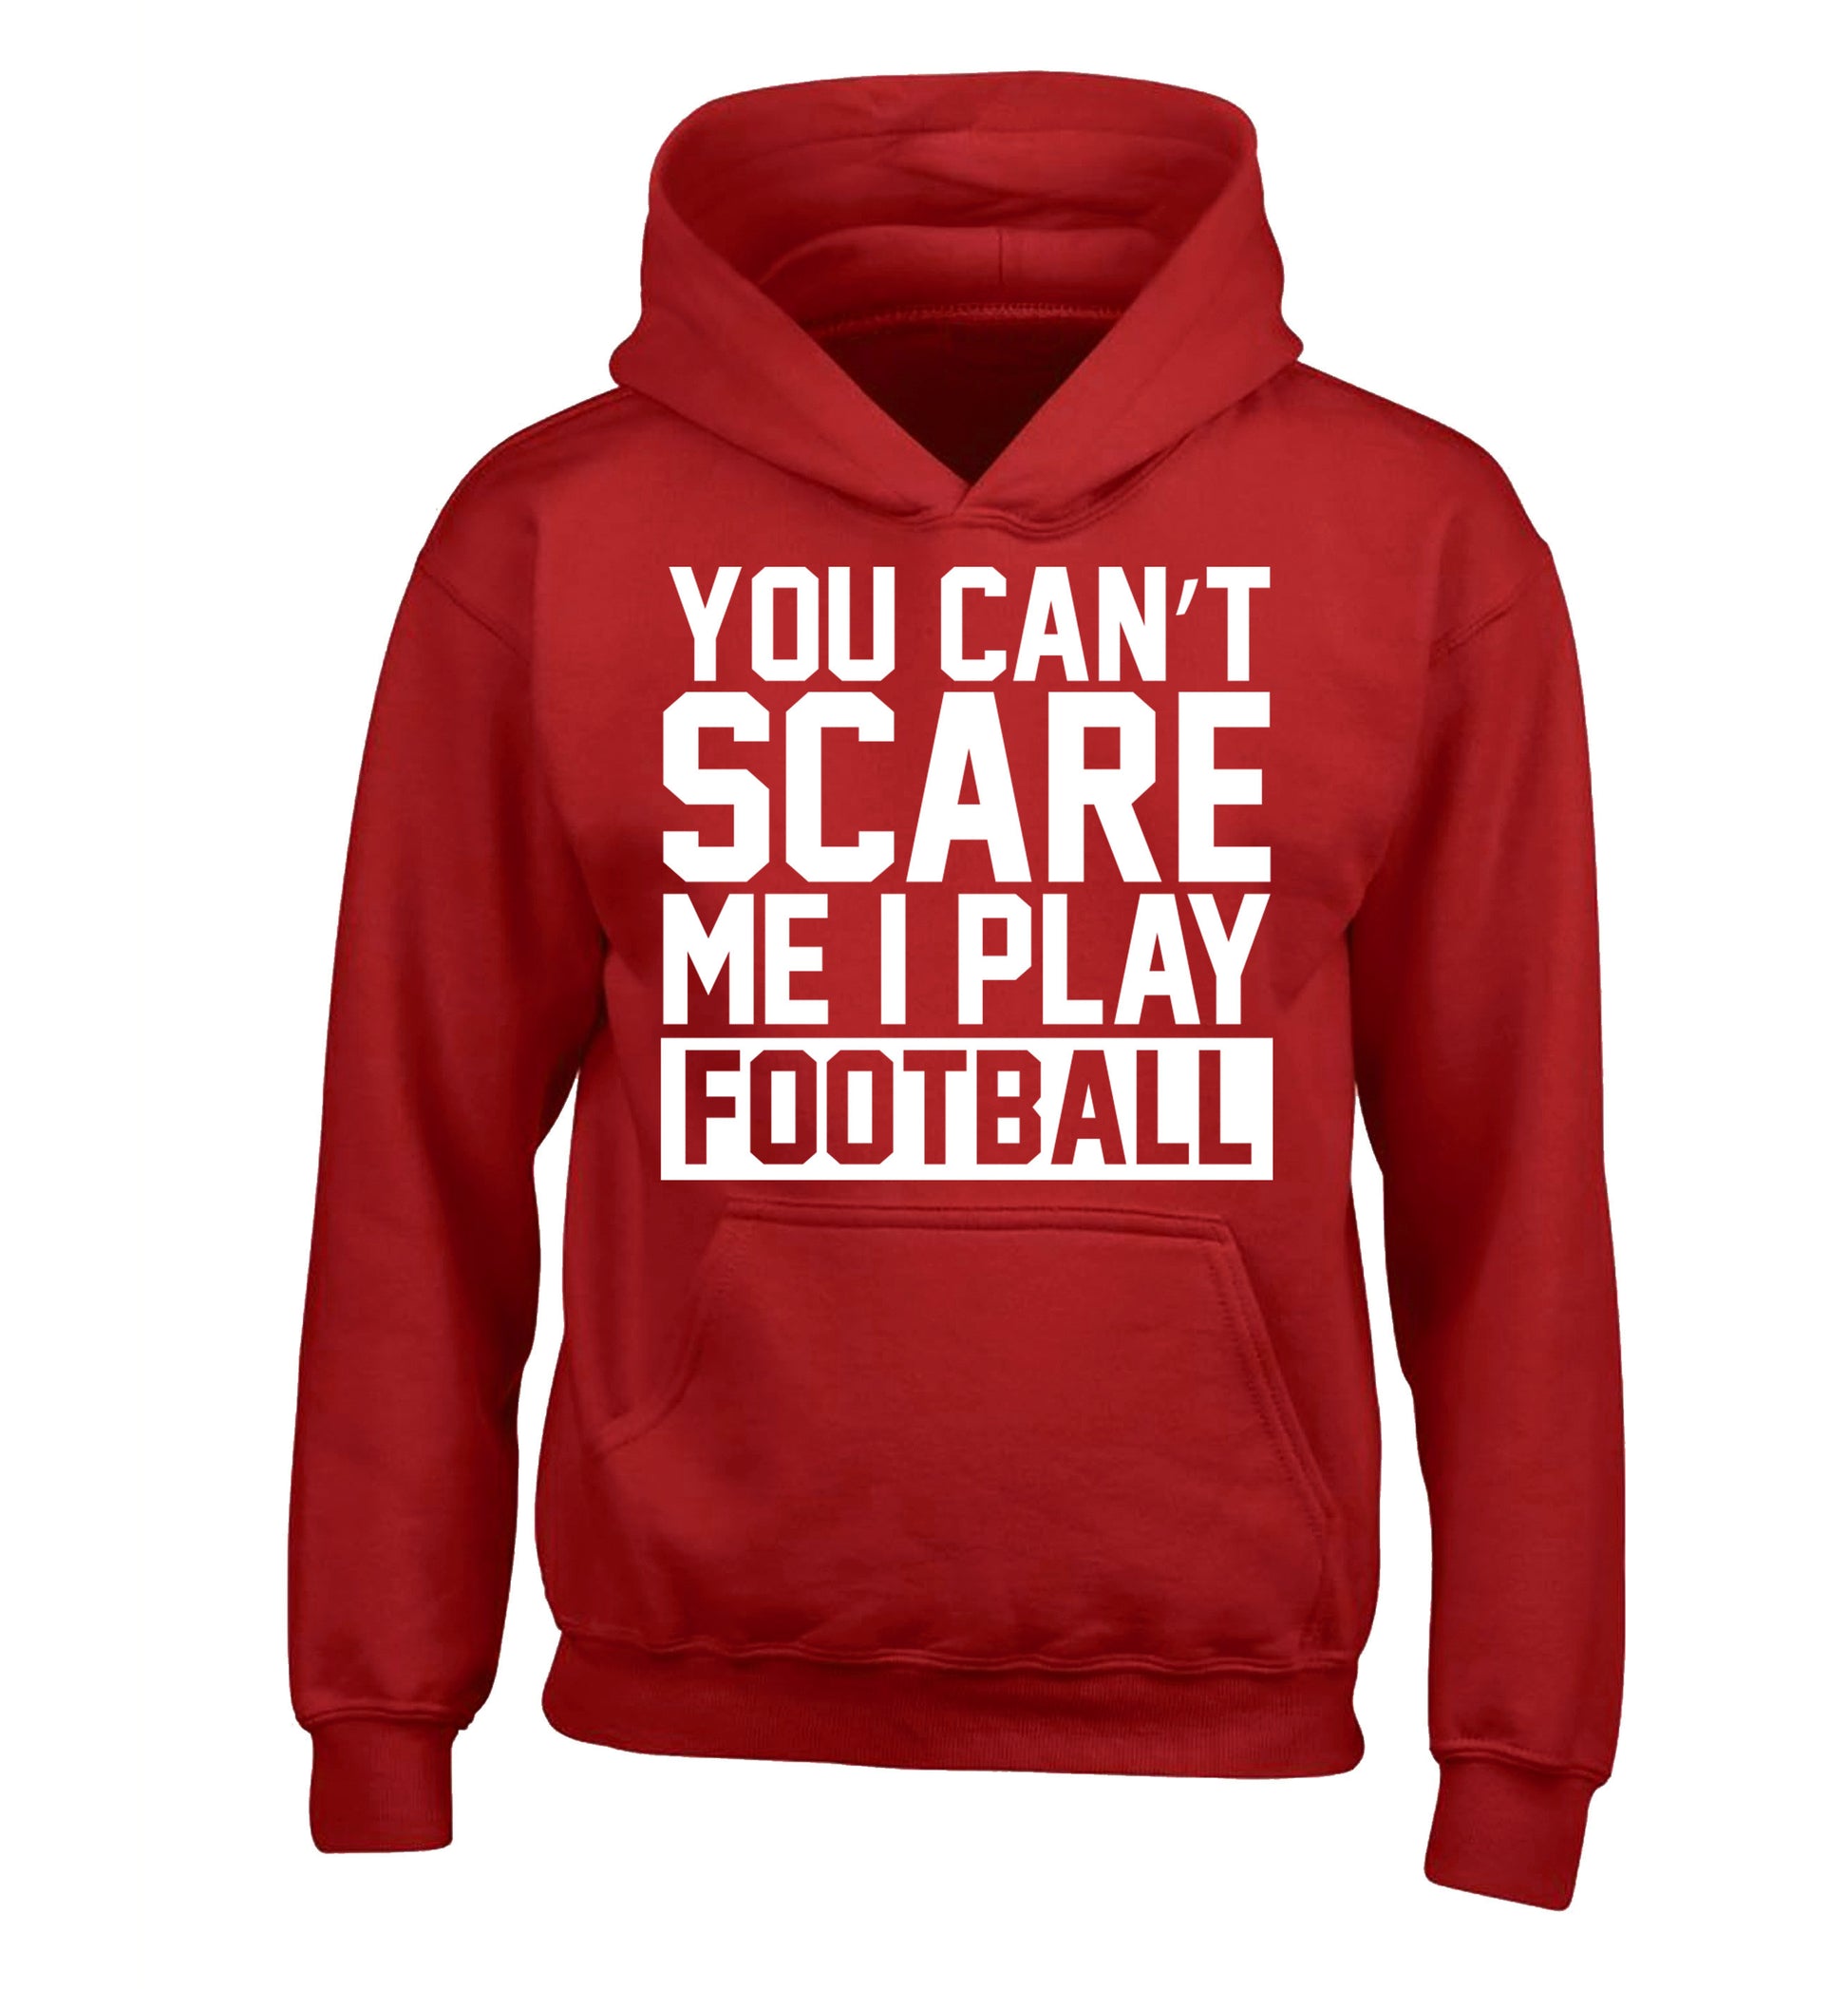 You can't scare me I play football children's red hoodie 12-14 Years